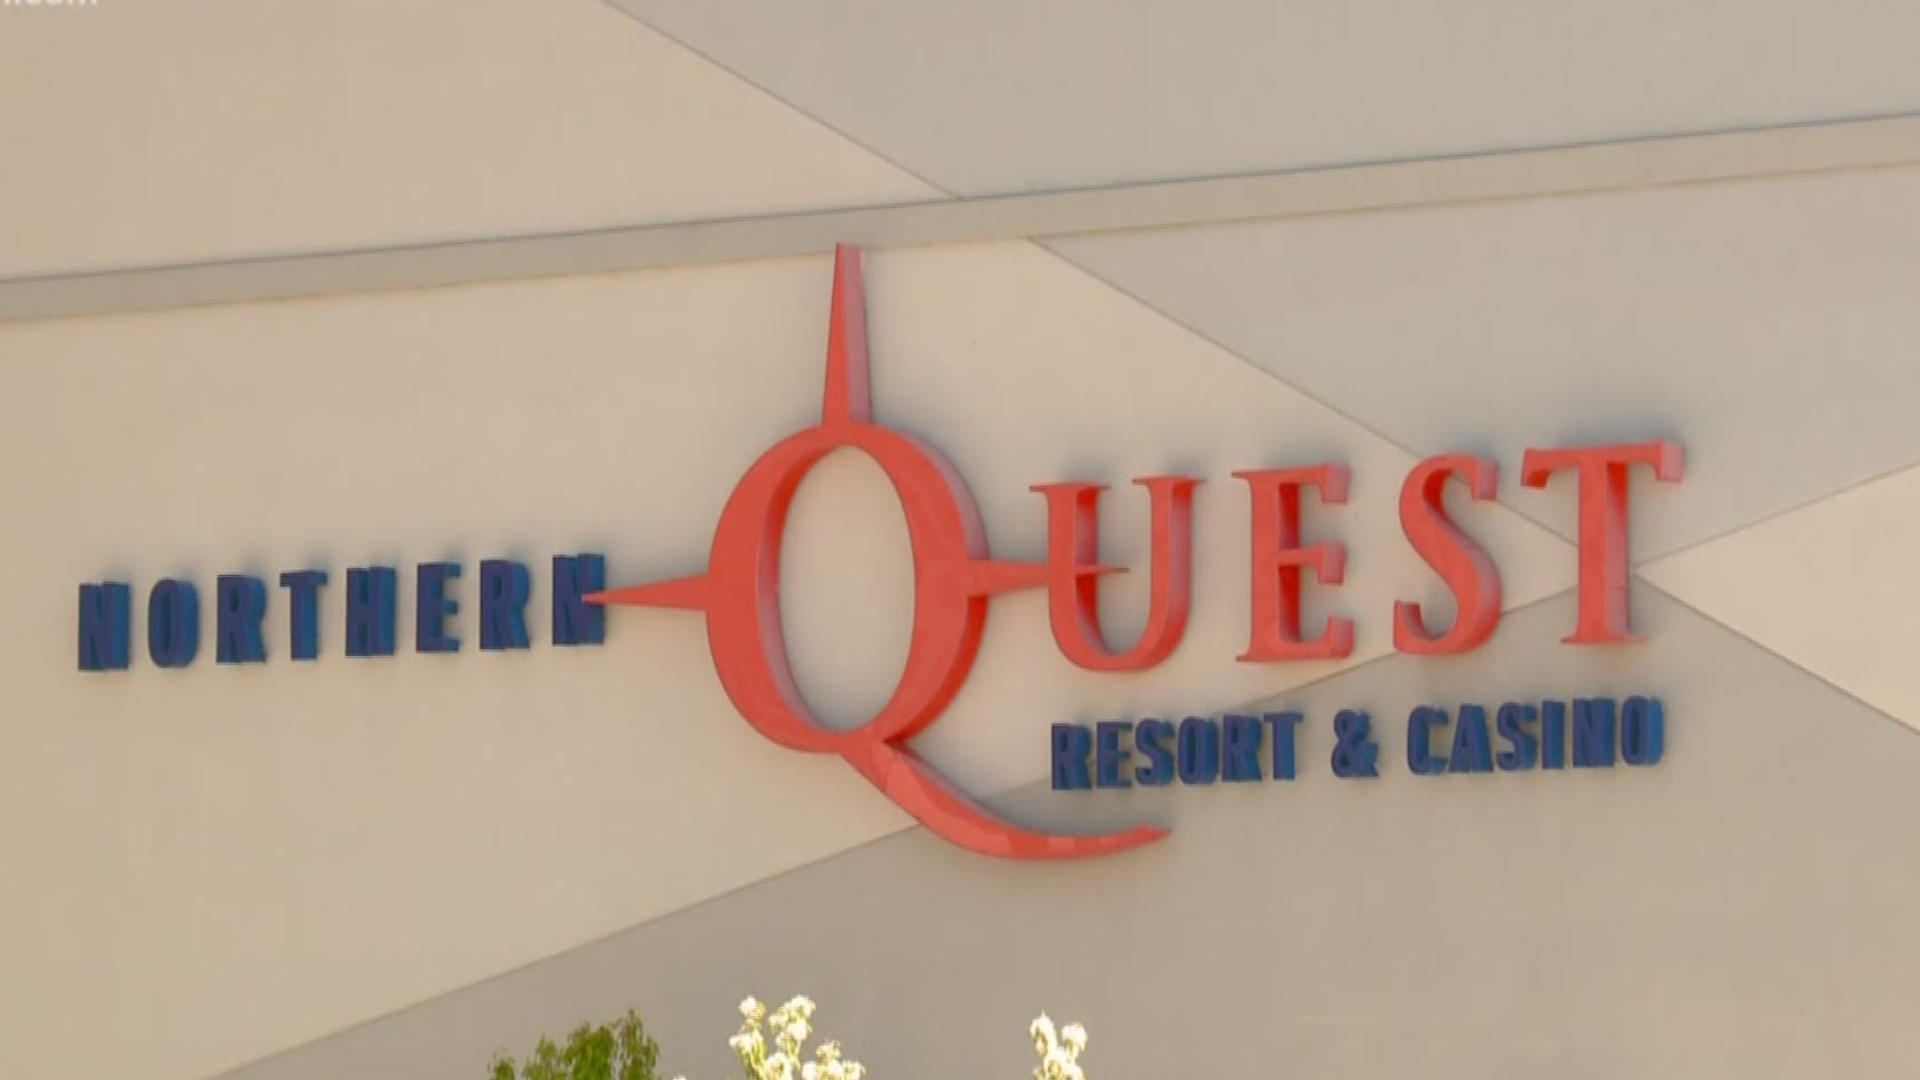 northern quest casino events